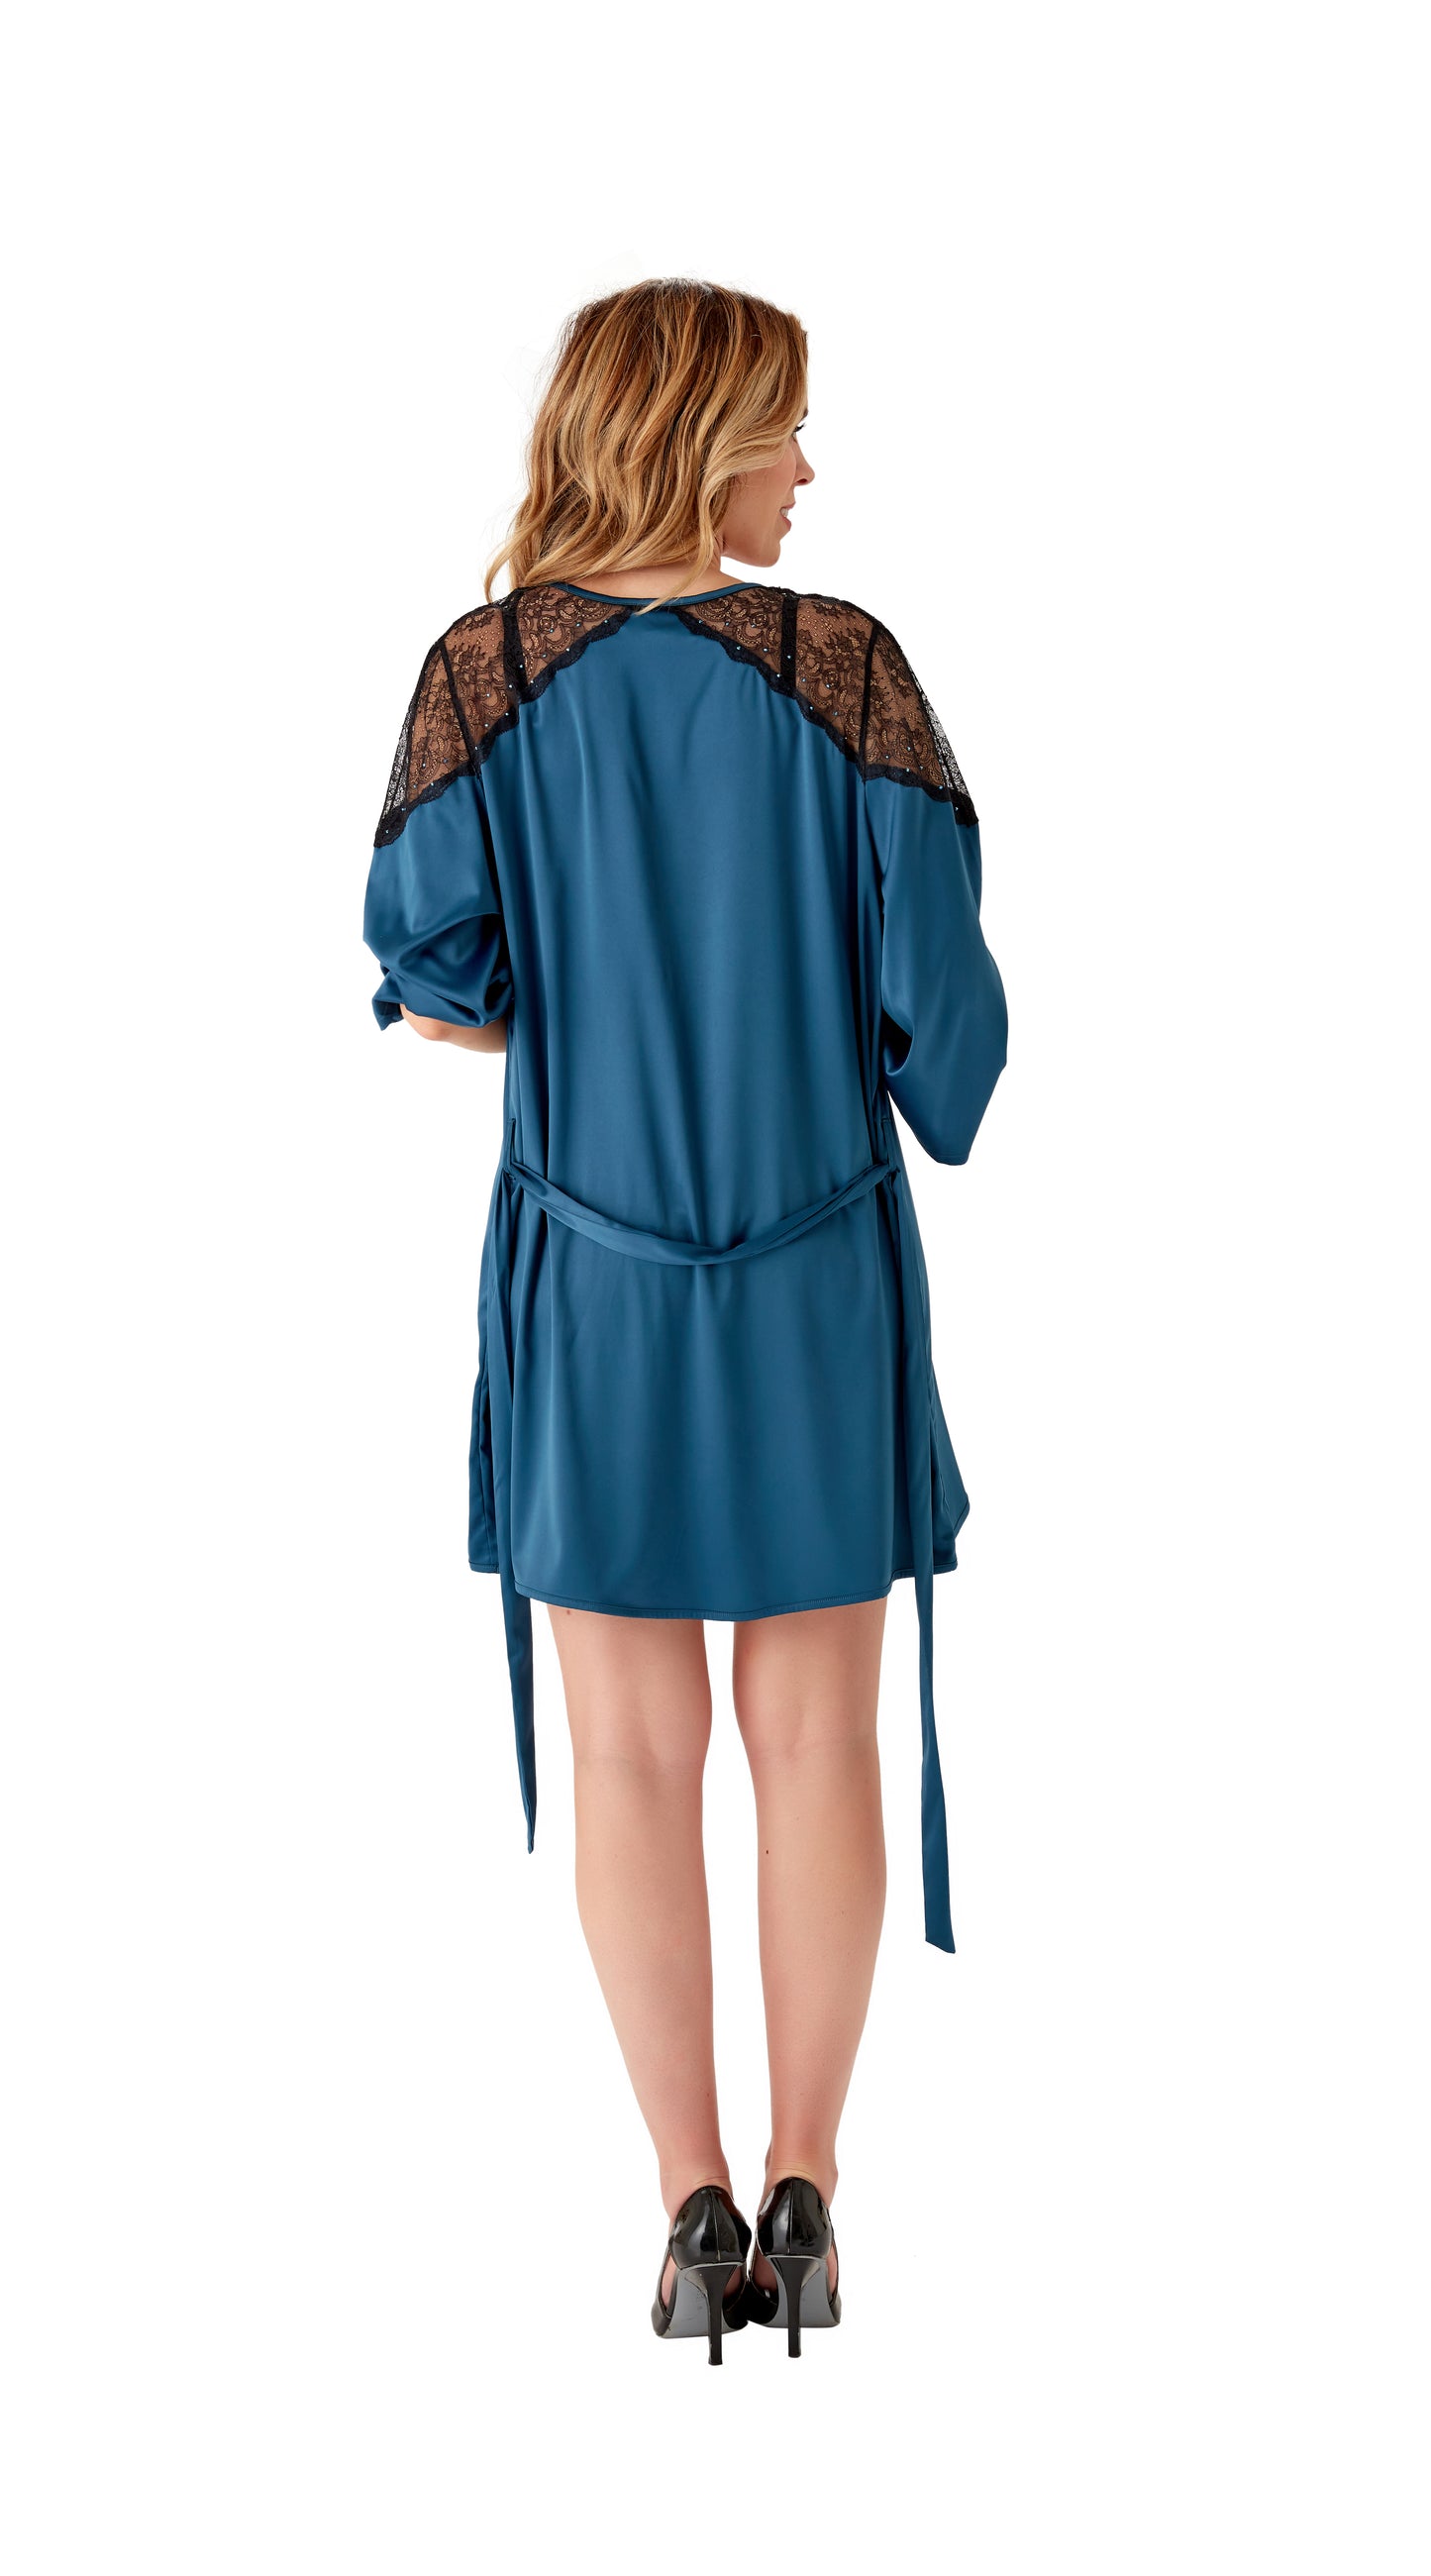 VIP Confession Satin Robe in Teal/Black By Gossard - XS-XL